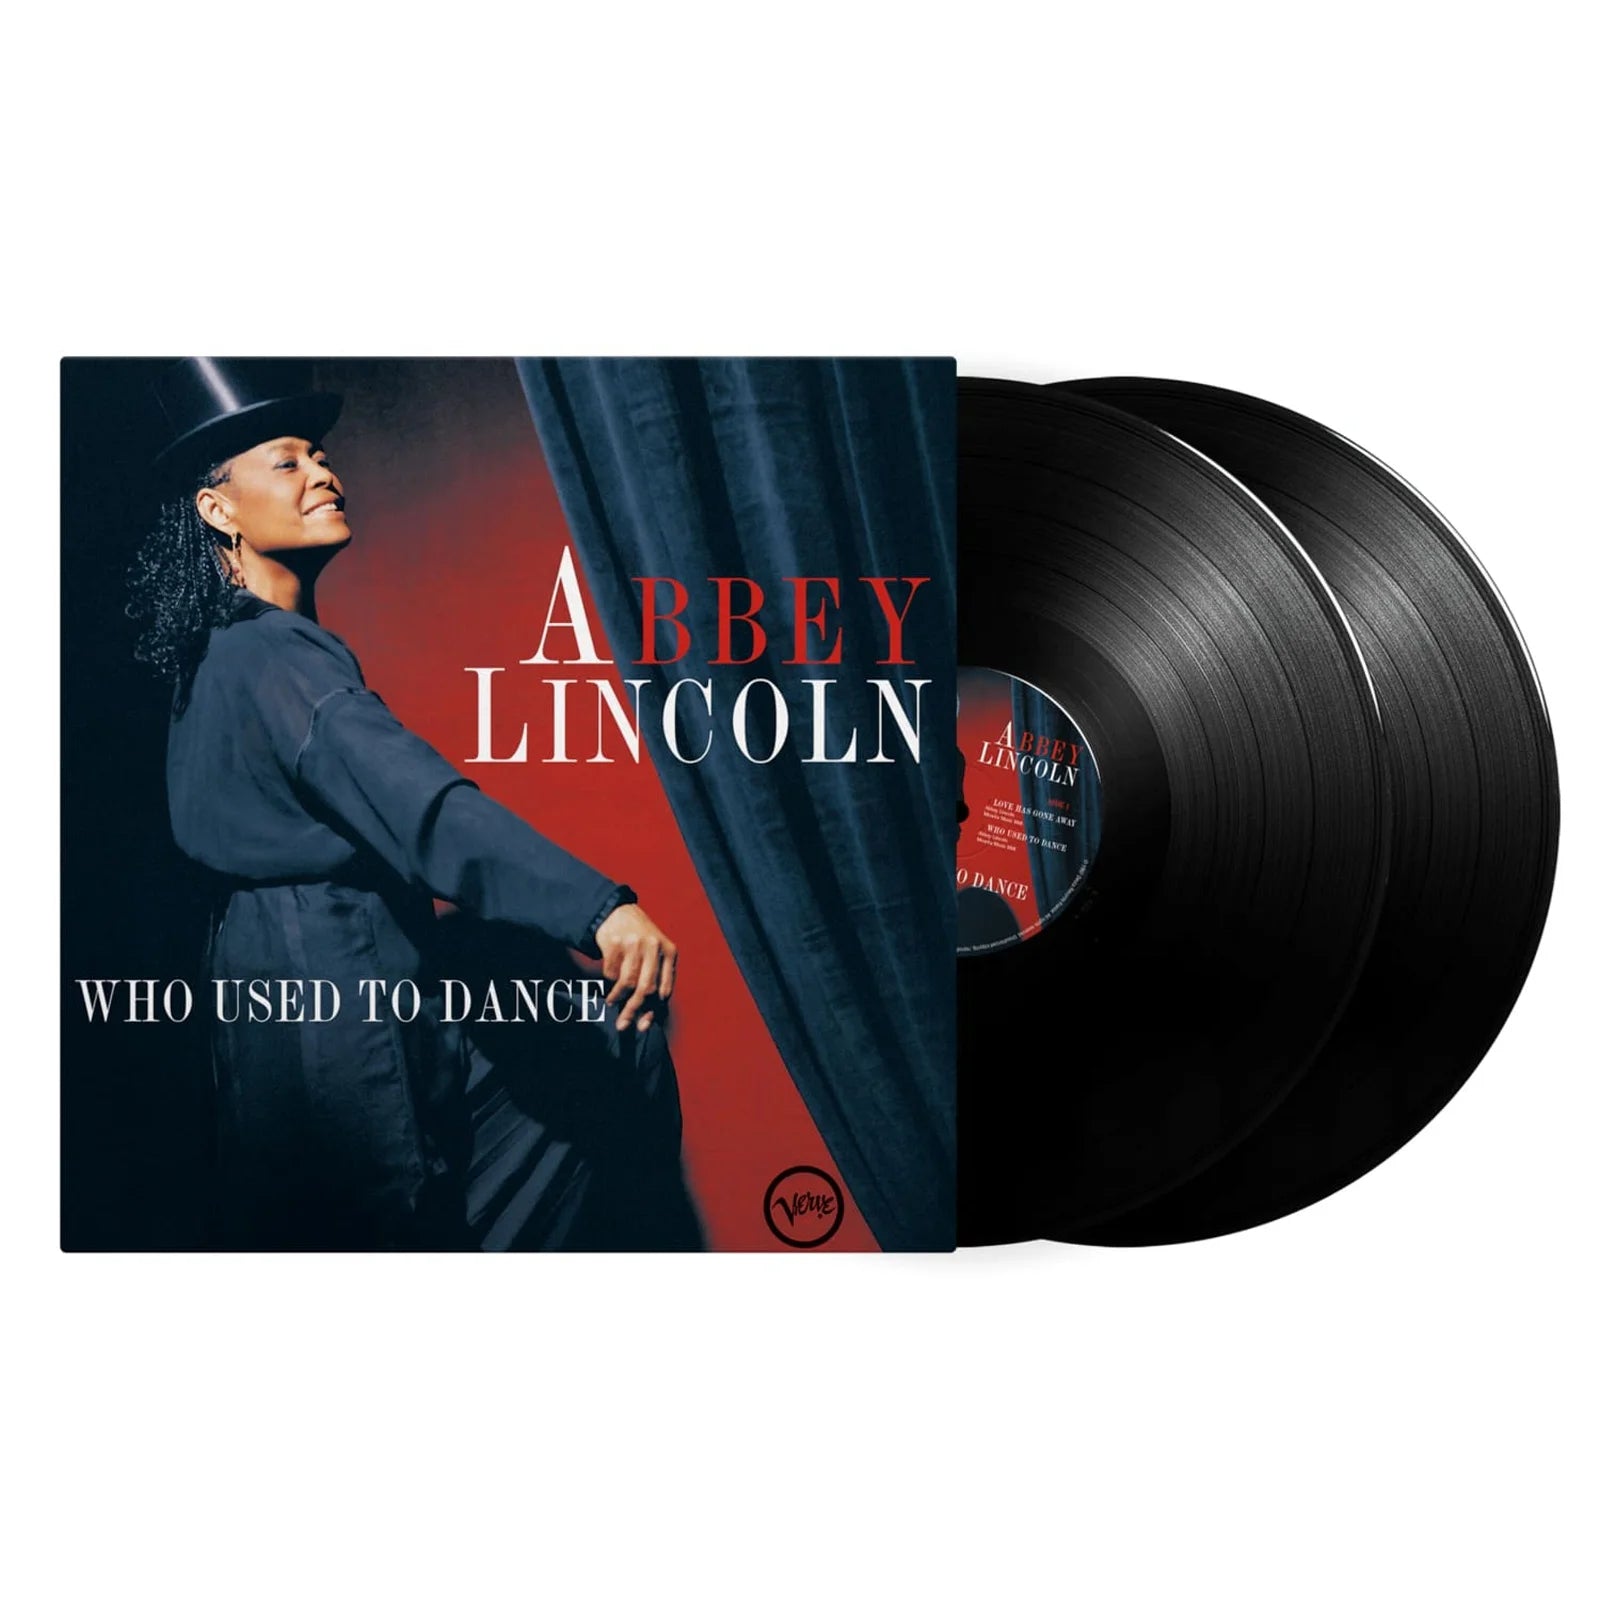 Abbey Lincoln - Who Used to Dance - 2LP - 180g Vinyl